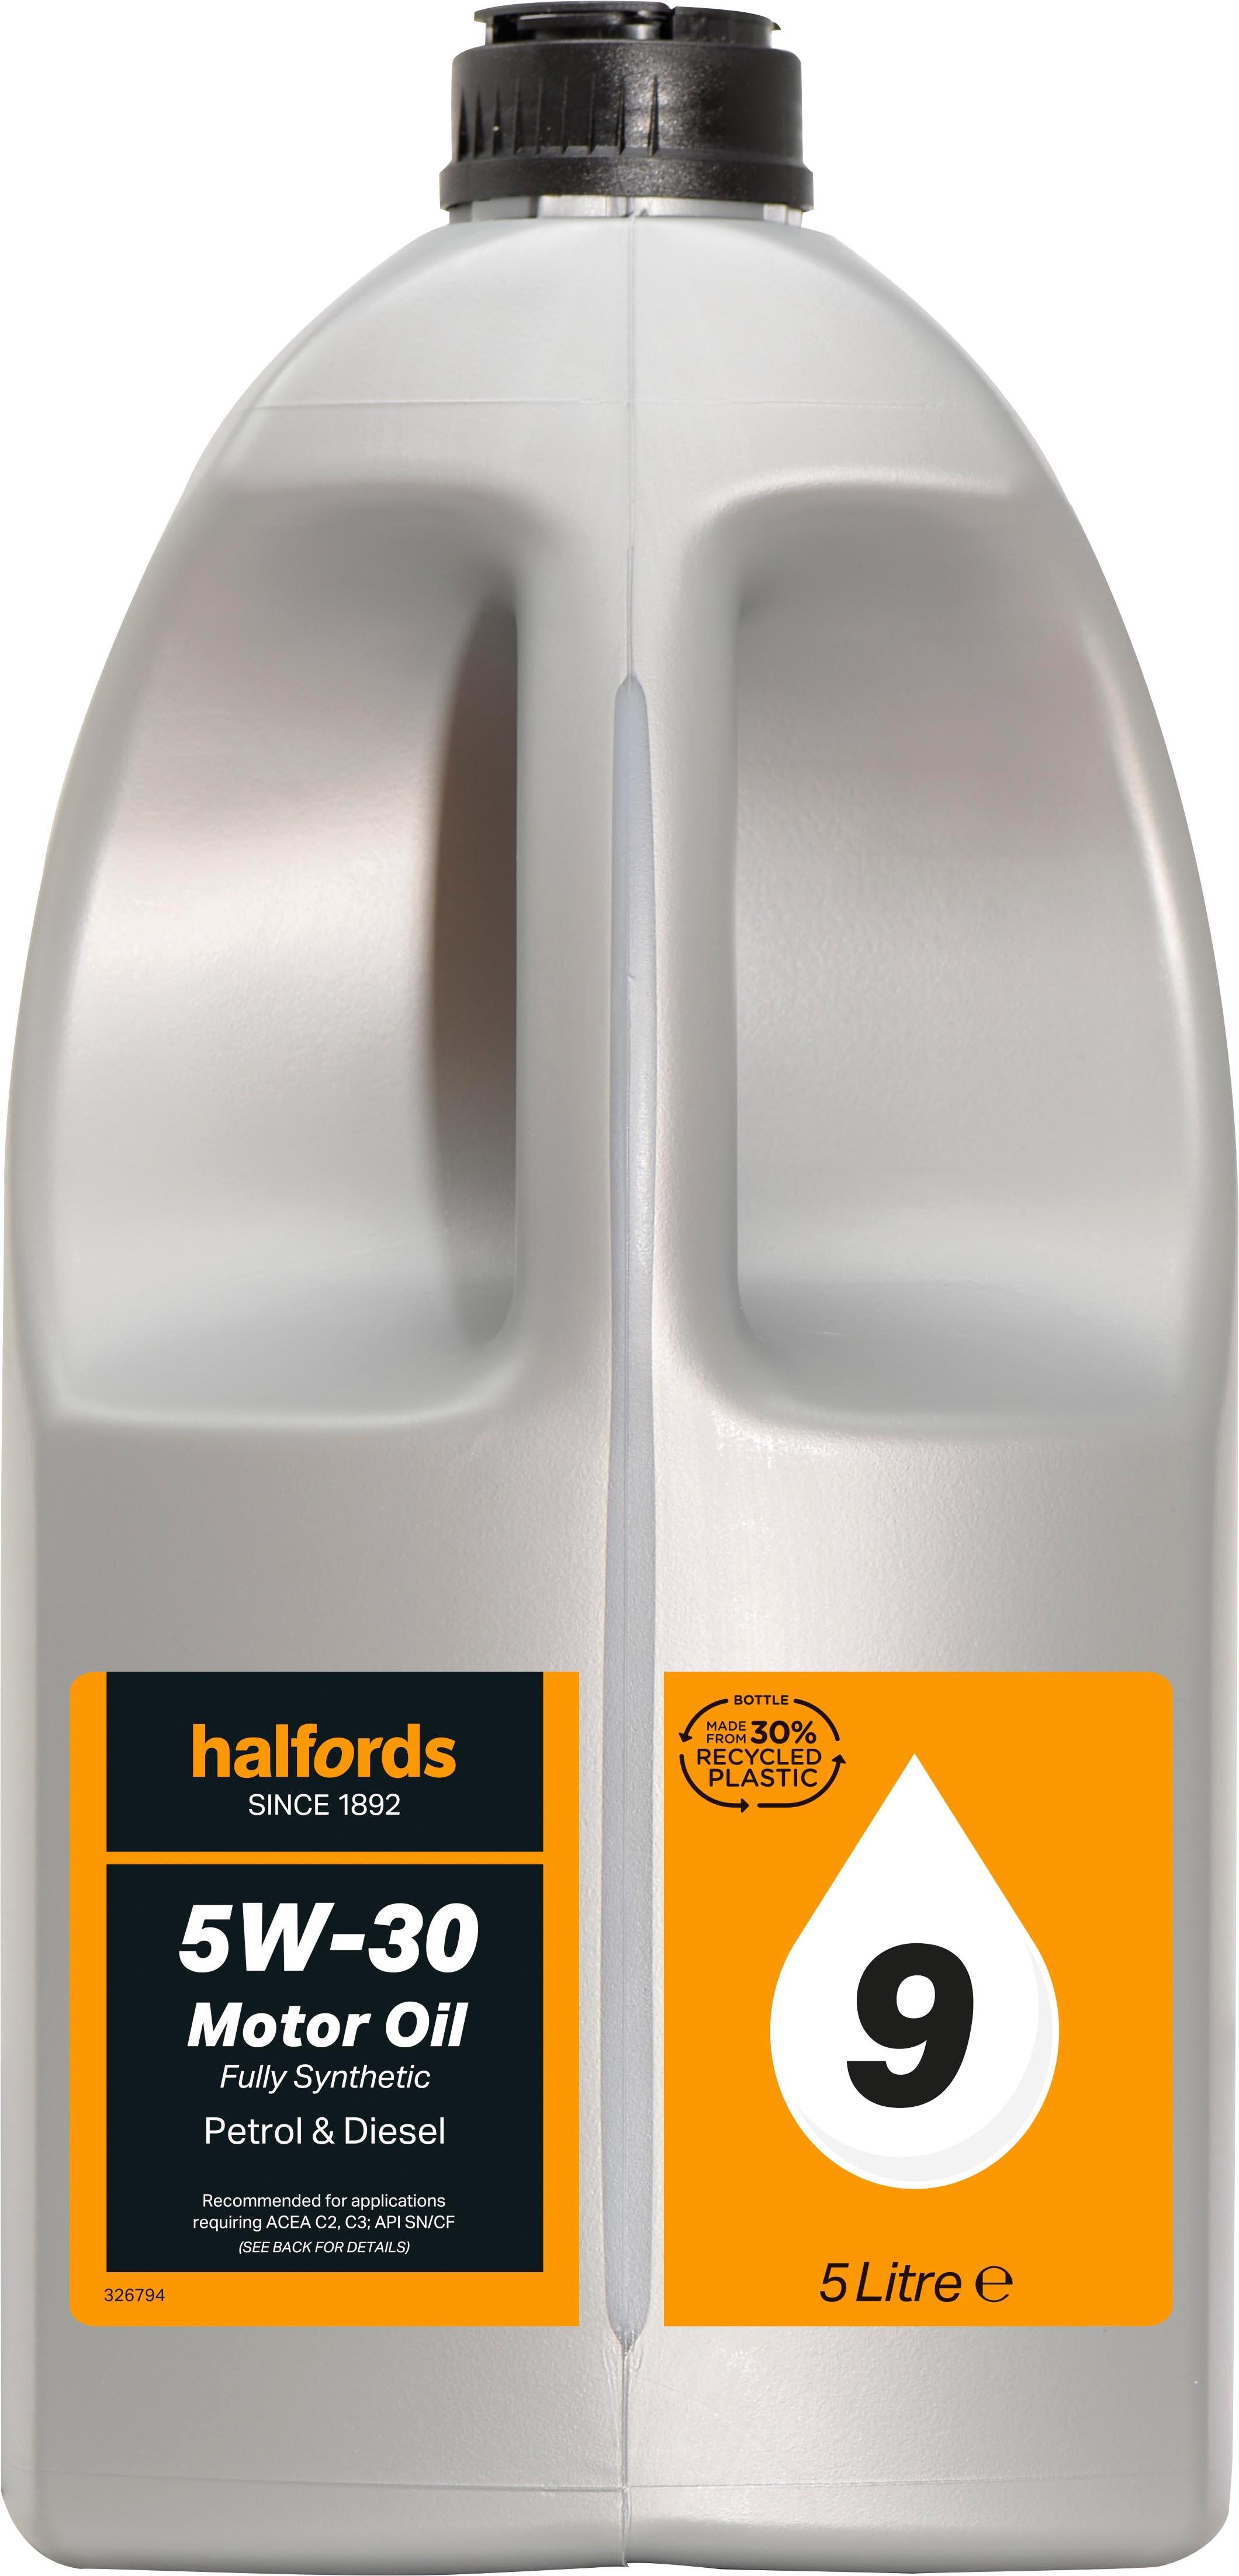 Halfords 5W30 Fully Synthetic Oil 9 - 5 Litres